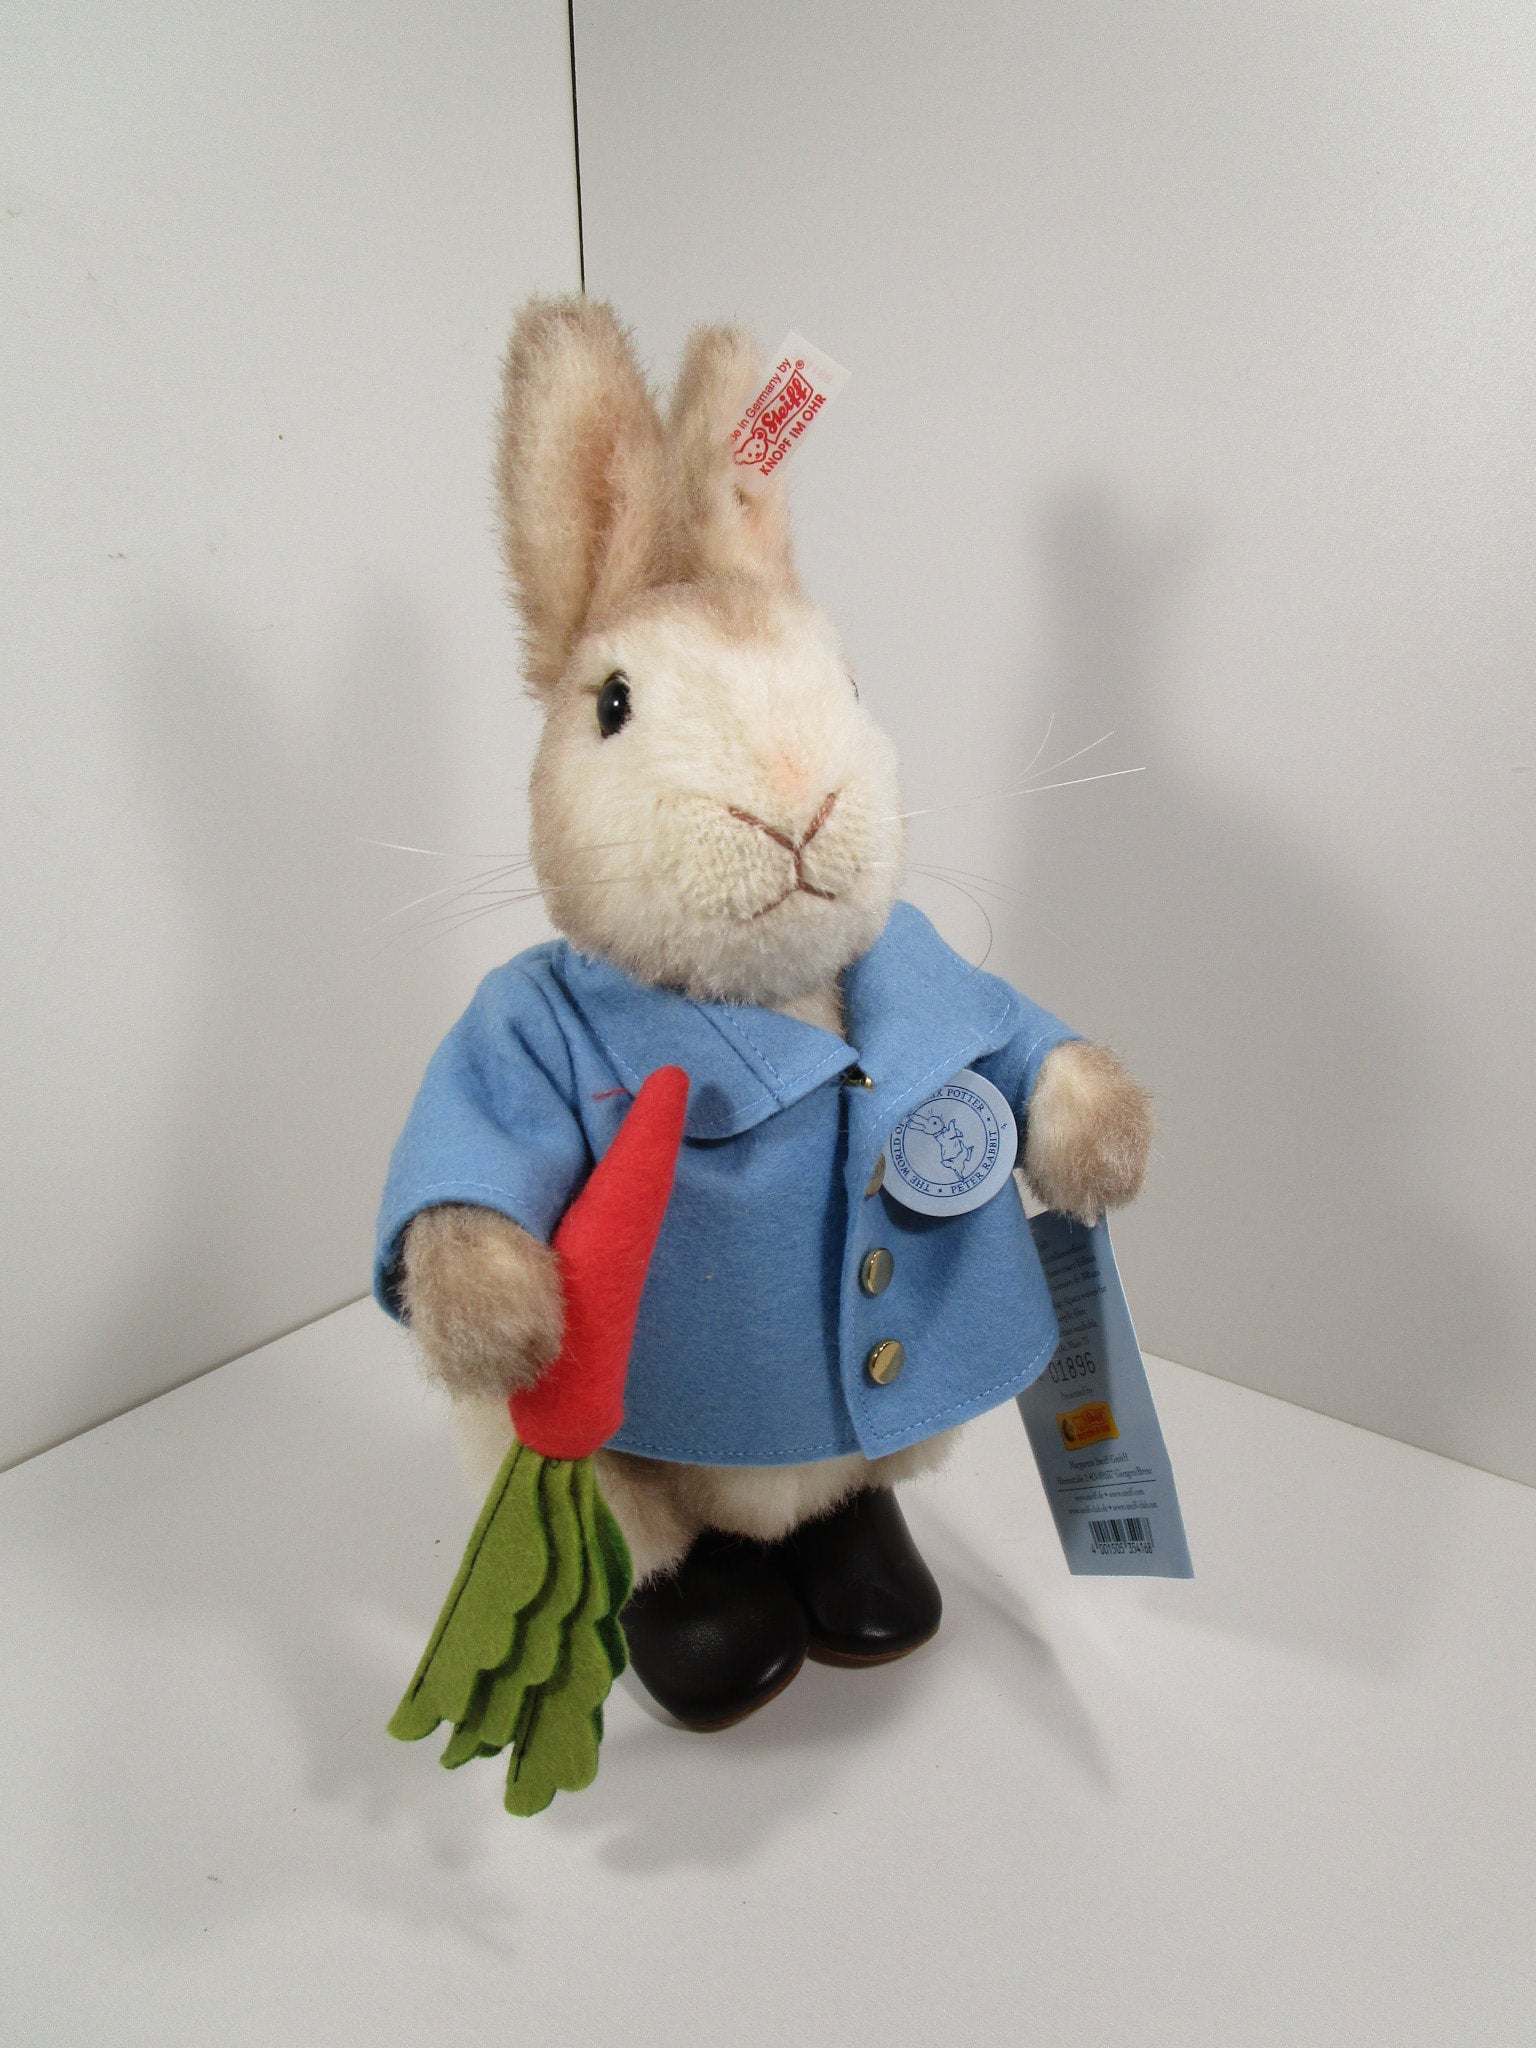 Steiff Beatrix Potter Peter Rabbit With All IDs